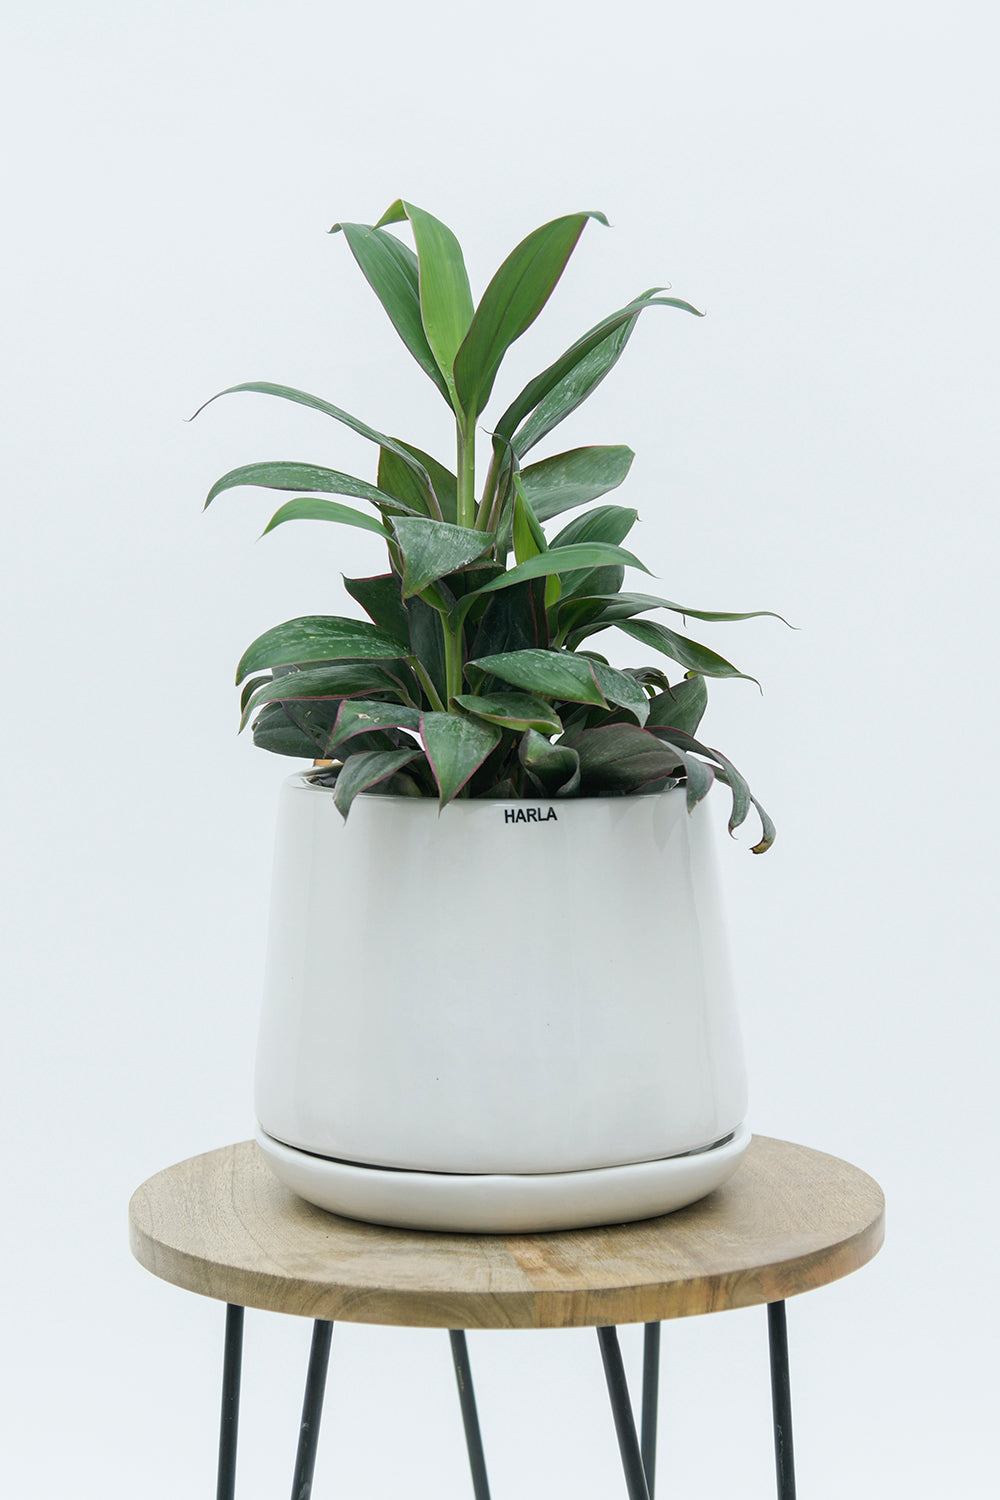 Medium size Monsoon Medley ceramic planter in white color with plant placed on the stool.